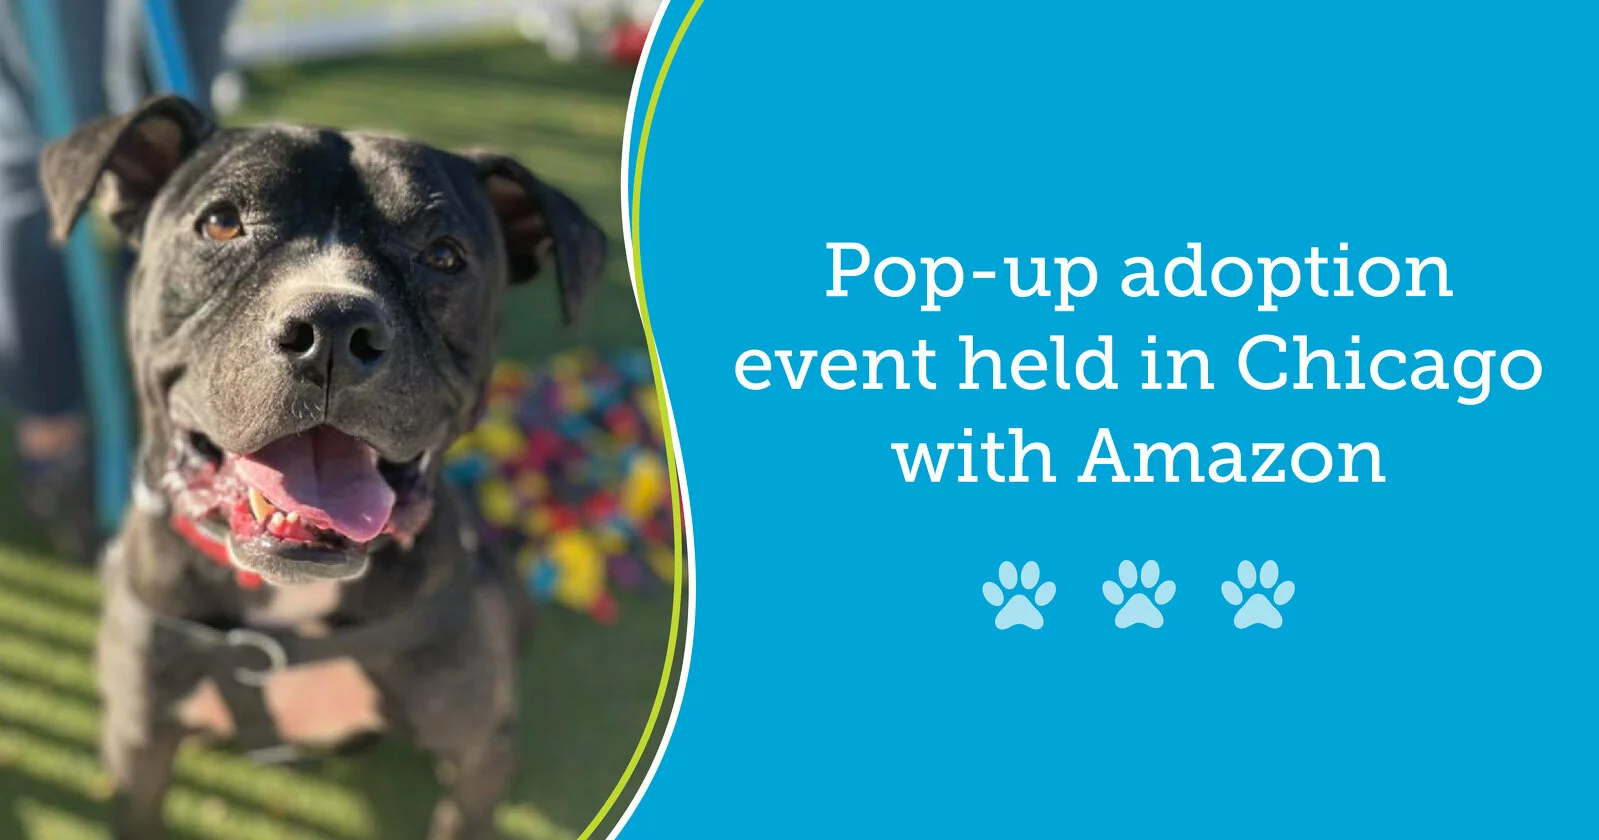 BISSELL Pet Foundation Partners with Amazon for Adoption Event - BISSELL Pet  Foundation